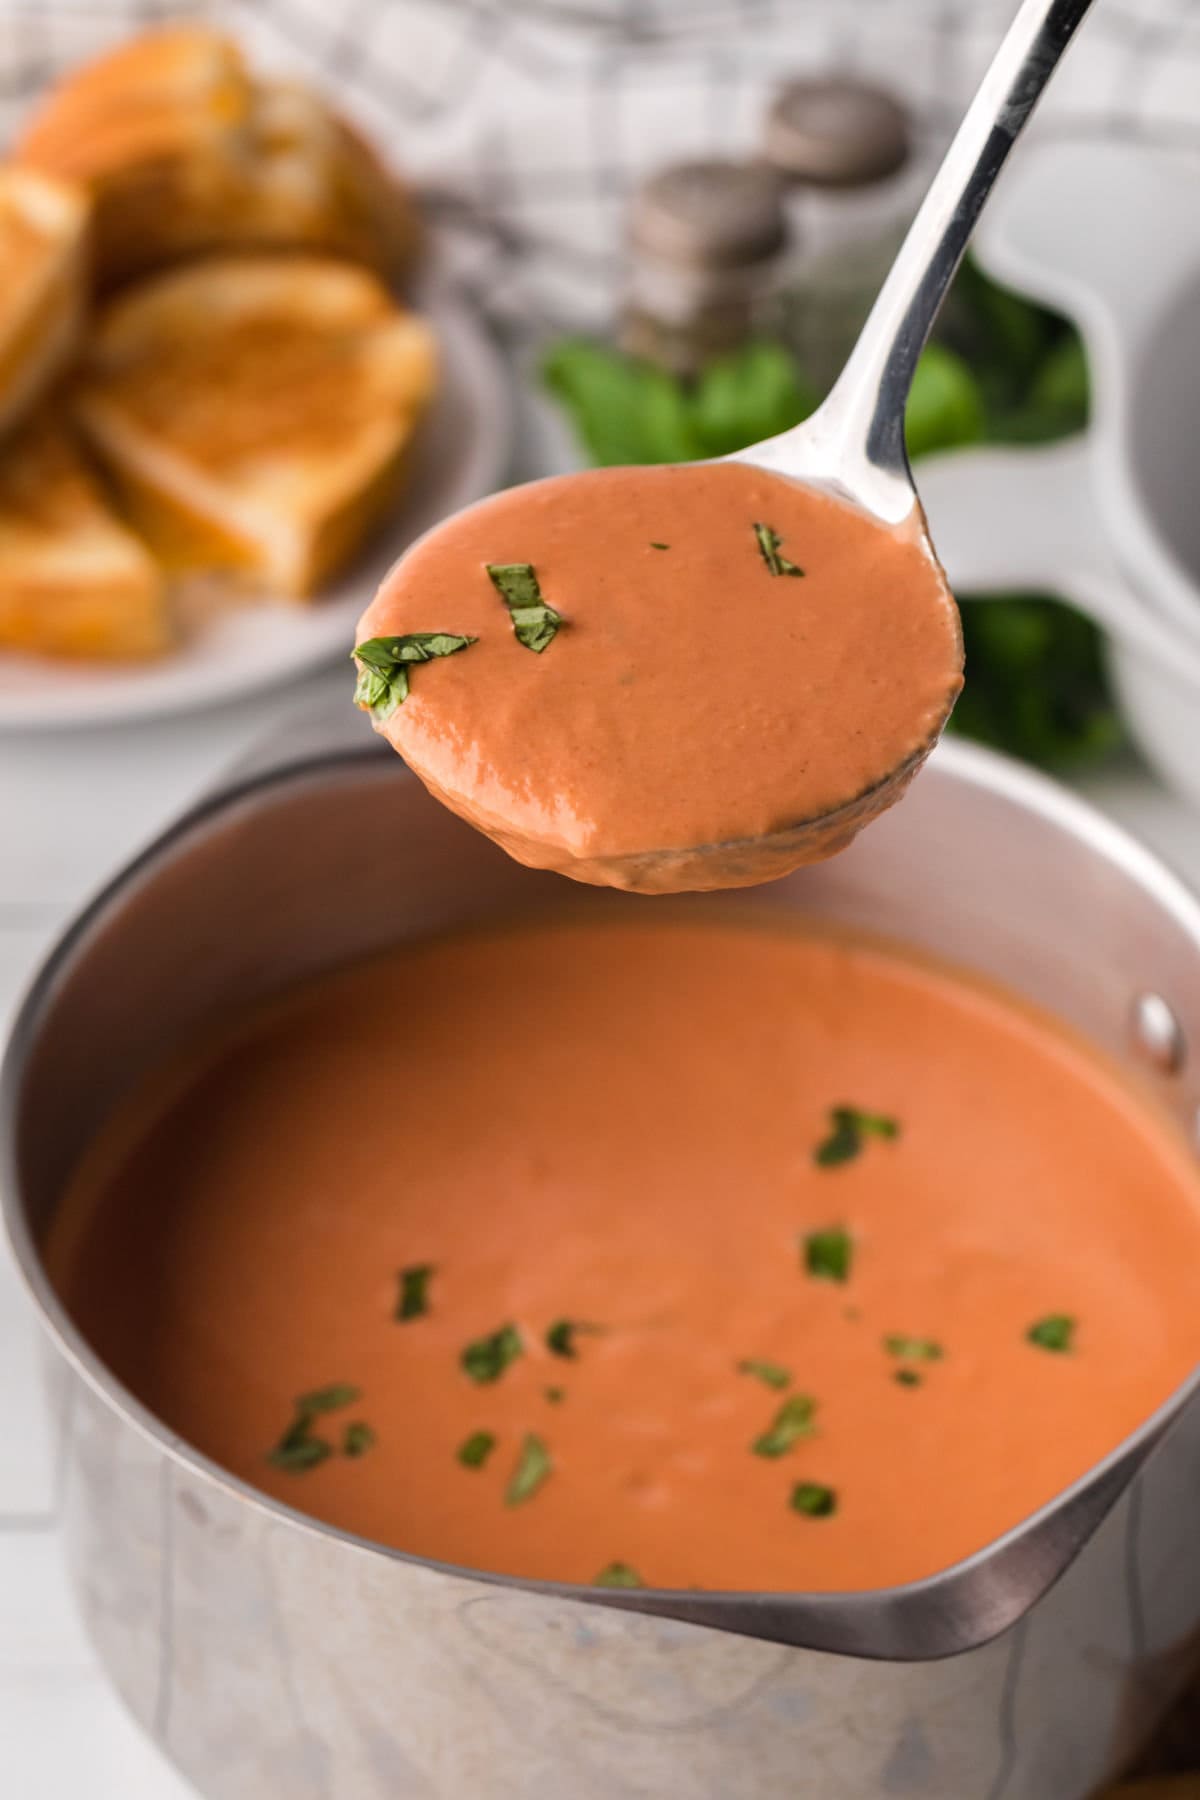 A spoonful of tomato soup being removed from the pot.